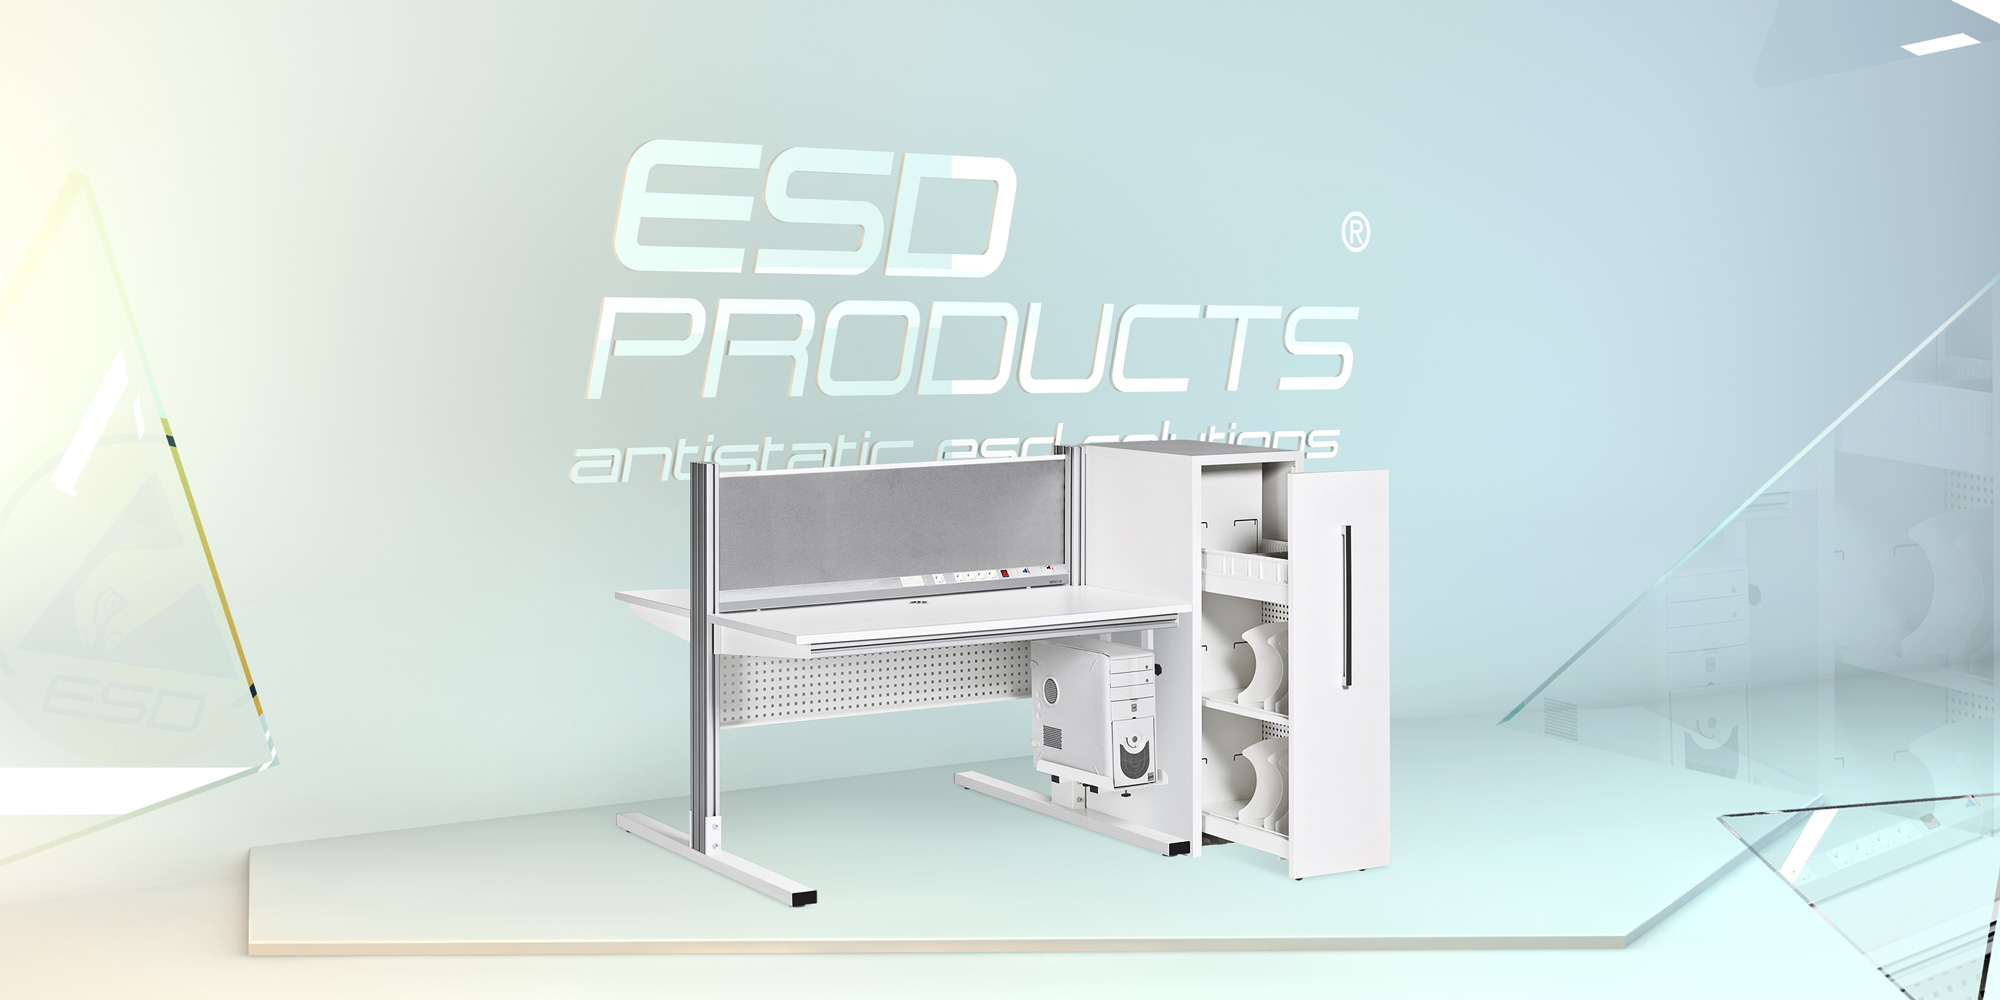 ESDworkbenches-esd-workstation-Antistatic-table-electronic-workbench-Alpha-esdproducts